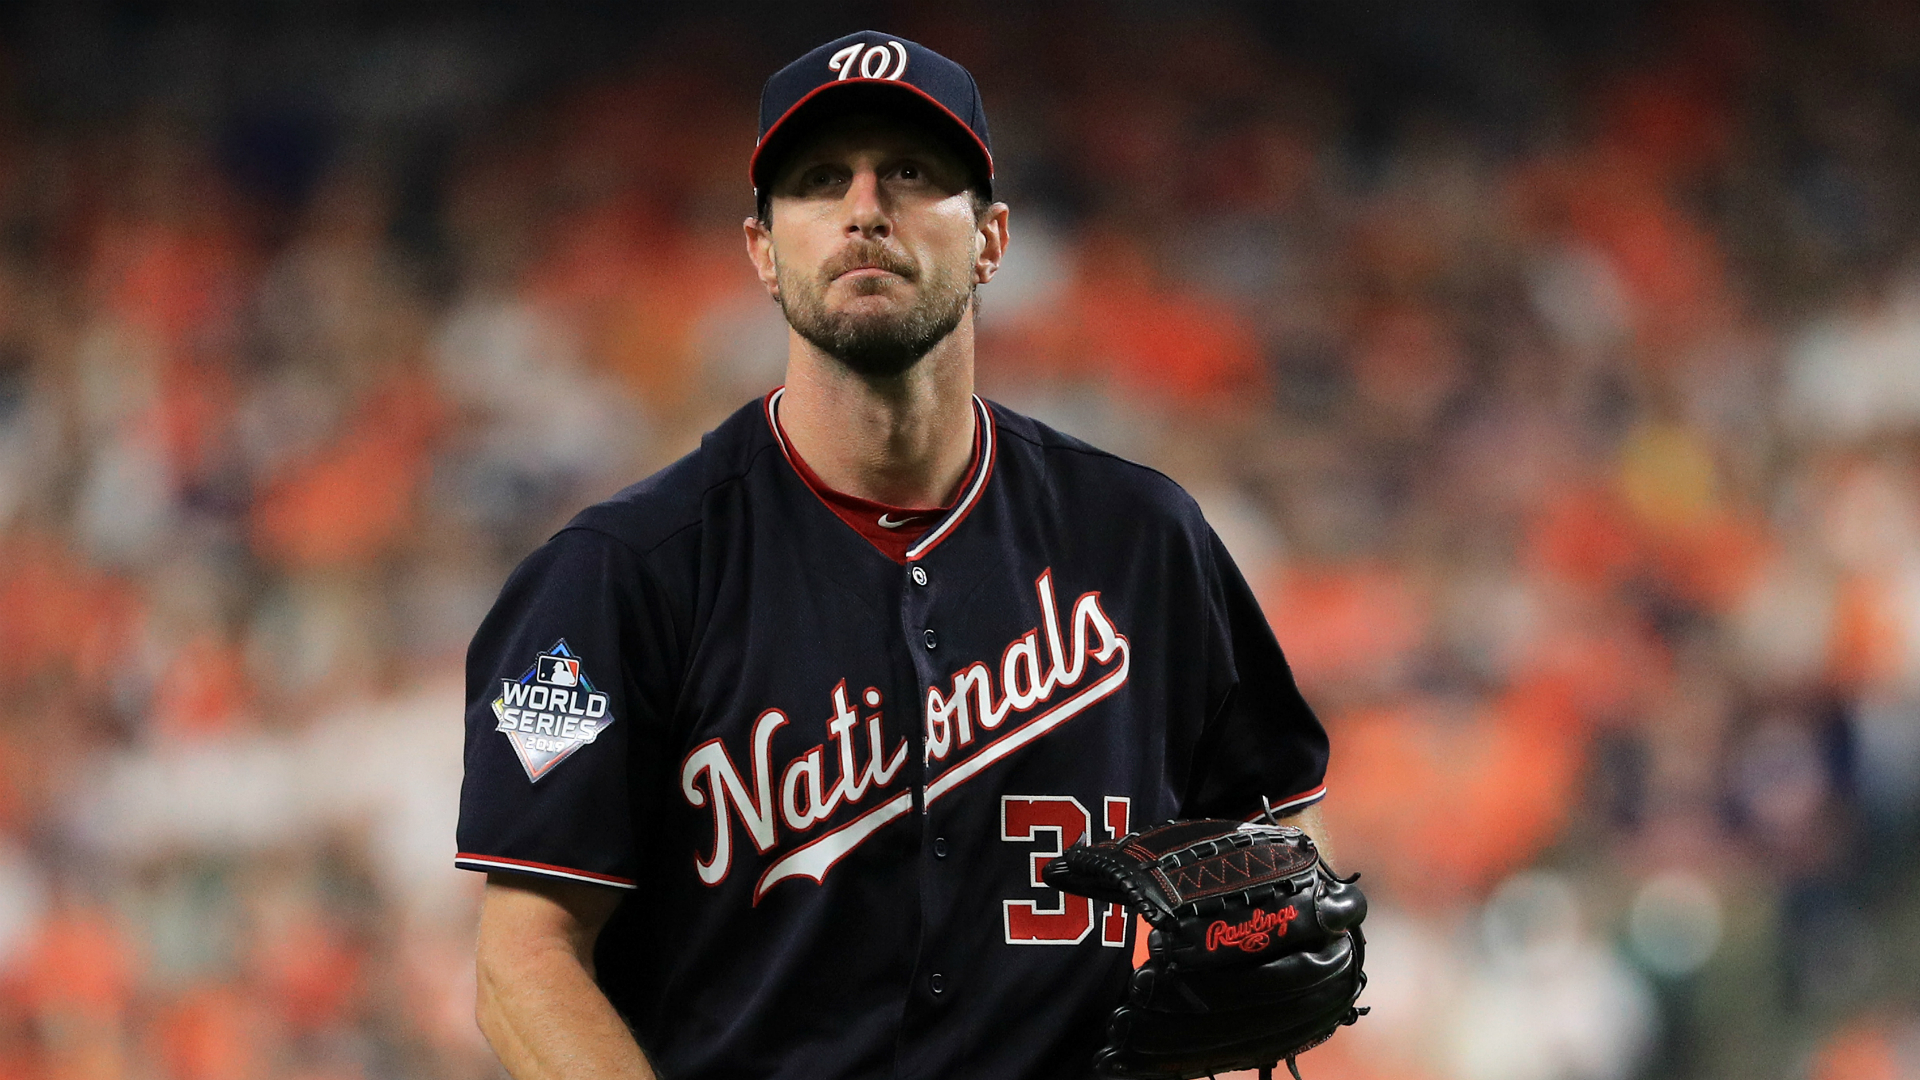 Nationals Max Scherzer gifts team with commemorative bottles ahead of